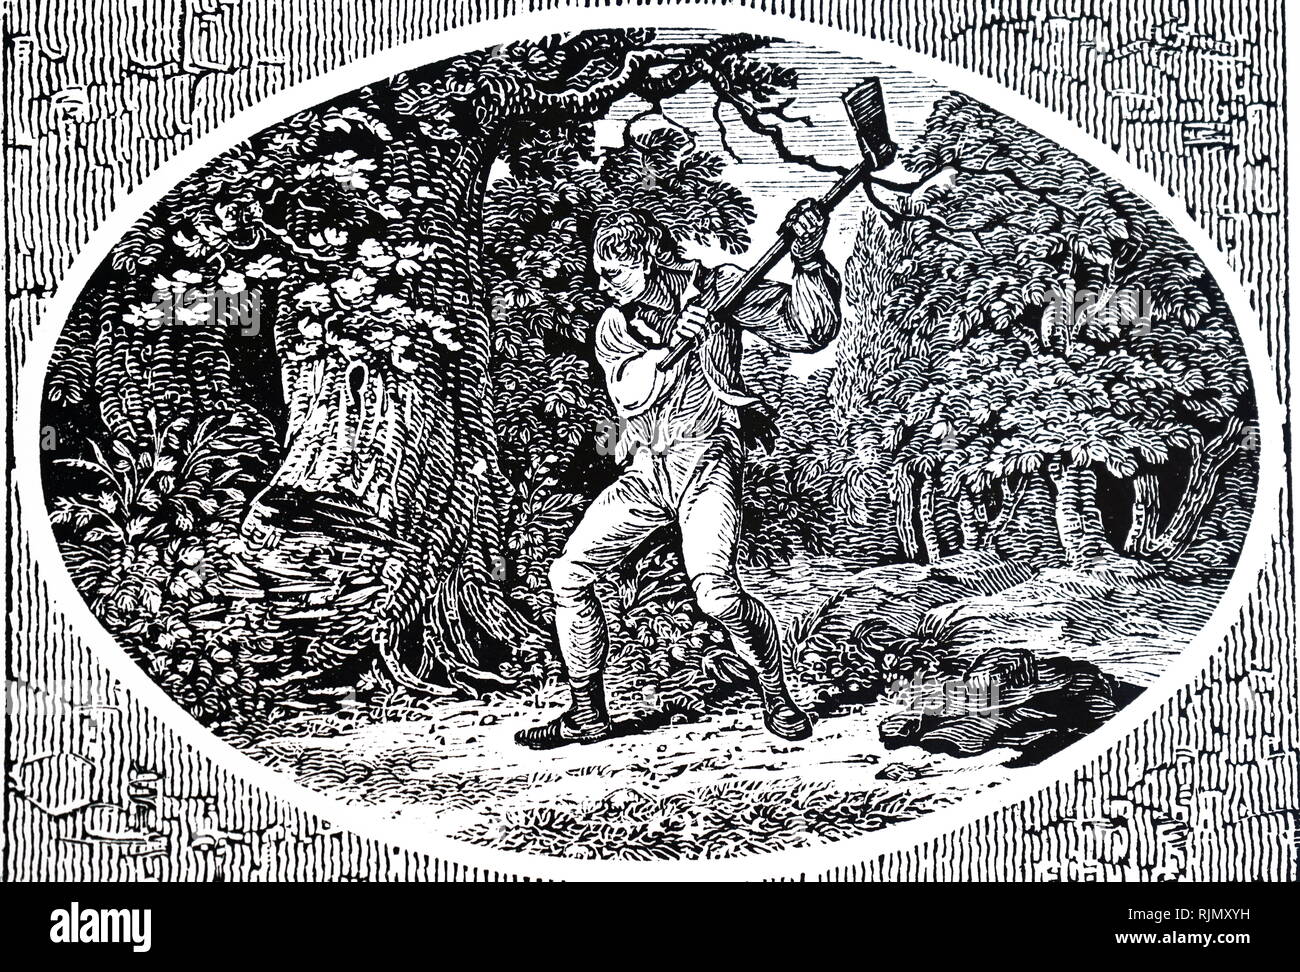 An engraving depicting a woodman chopping down an oak tree. From Thomas Bewick's 'The Fables of Aesop', Newcastle, 1818 Stock Photo